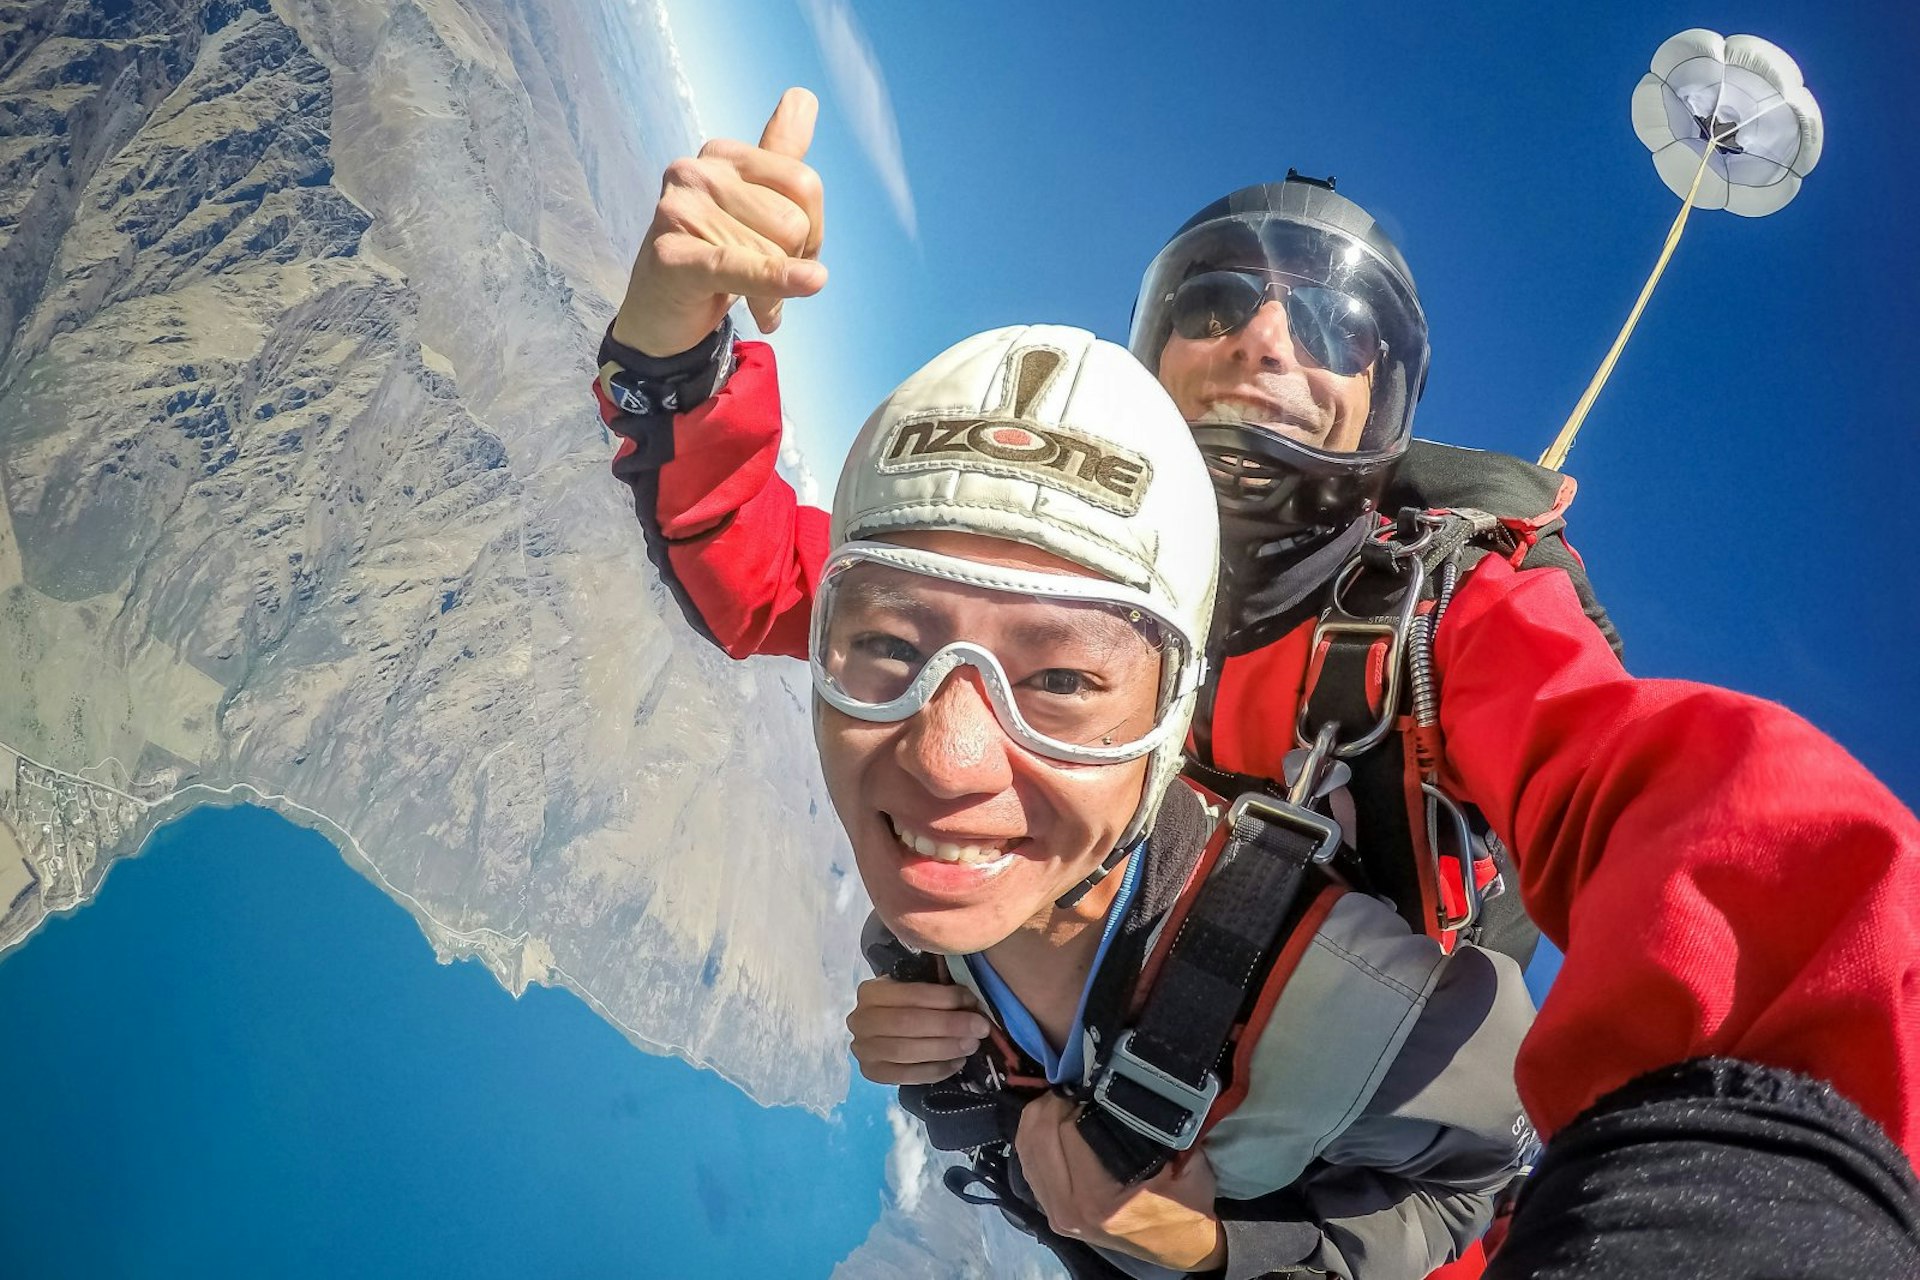 The skydiver smiles at the camera during freefall, while the instructor gives a thumbs up. The land and lake can be seen below